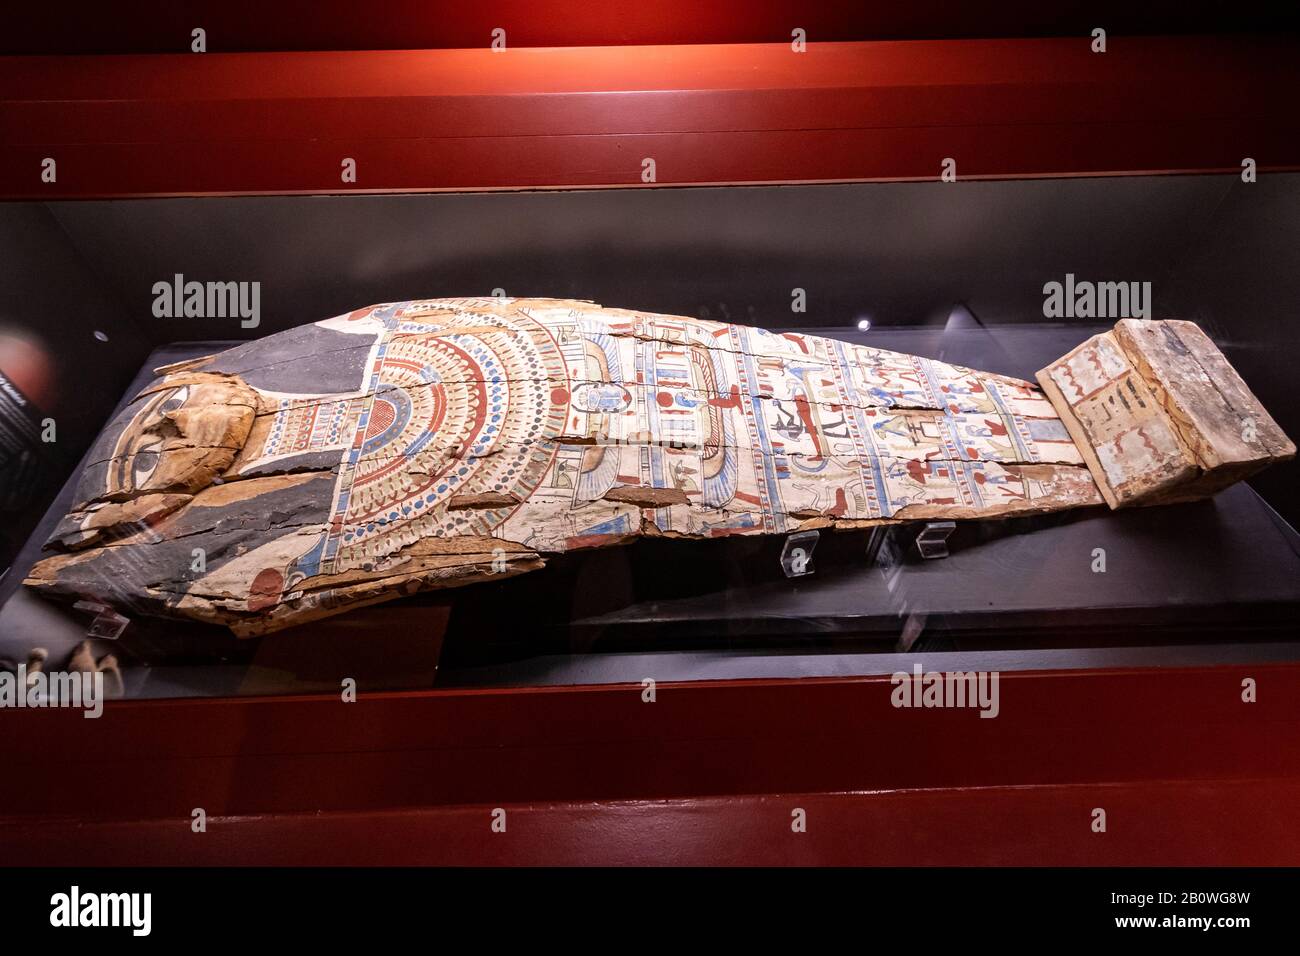 Egyptian coffin lid on display in Haslemere Museum, Surrey, UK, dating from circa 500 BC to 200 BC. Stock Photo